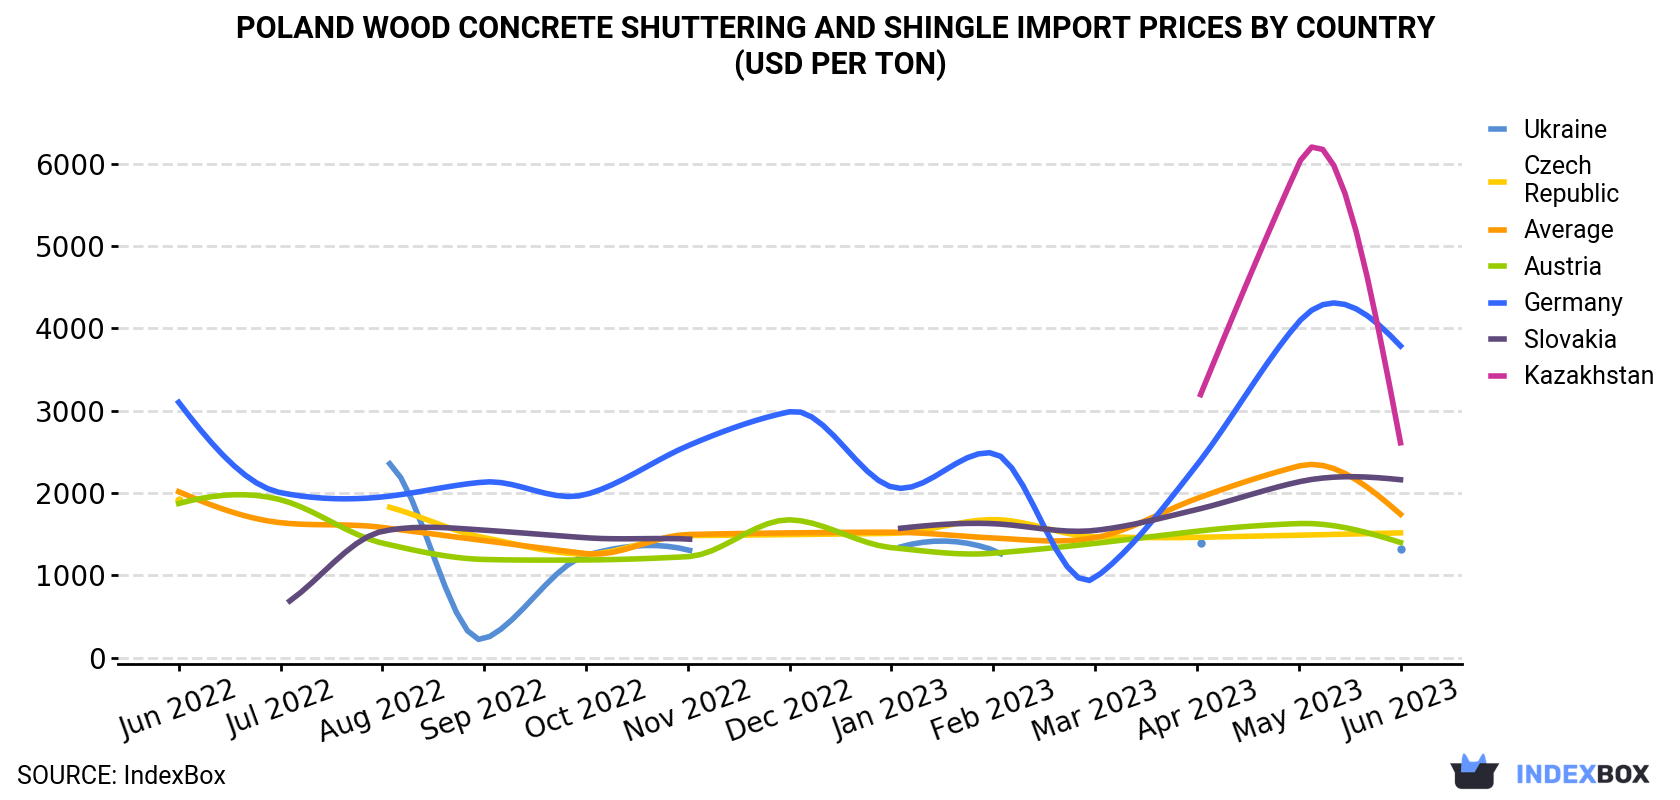 Poland Wood Concrete Shuttering and Shingle Import Prices By Country (USD Per Ton)